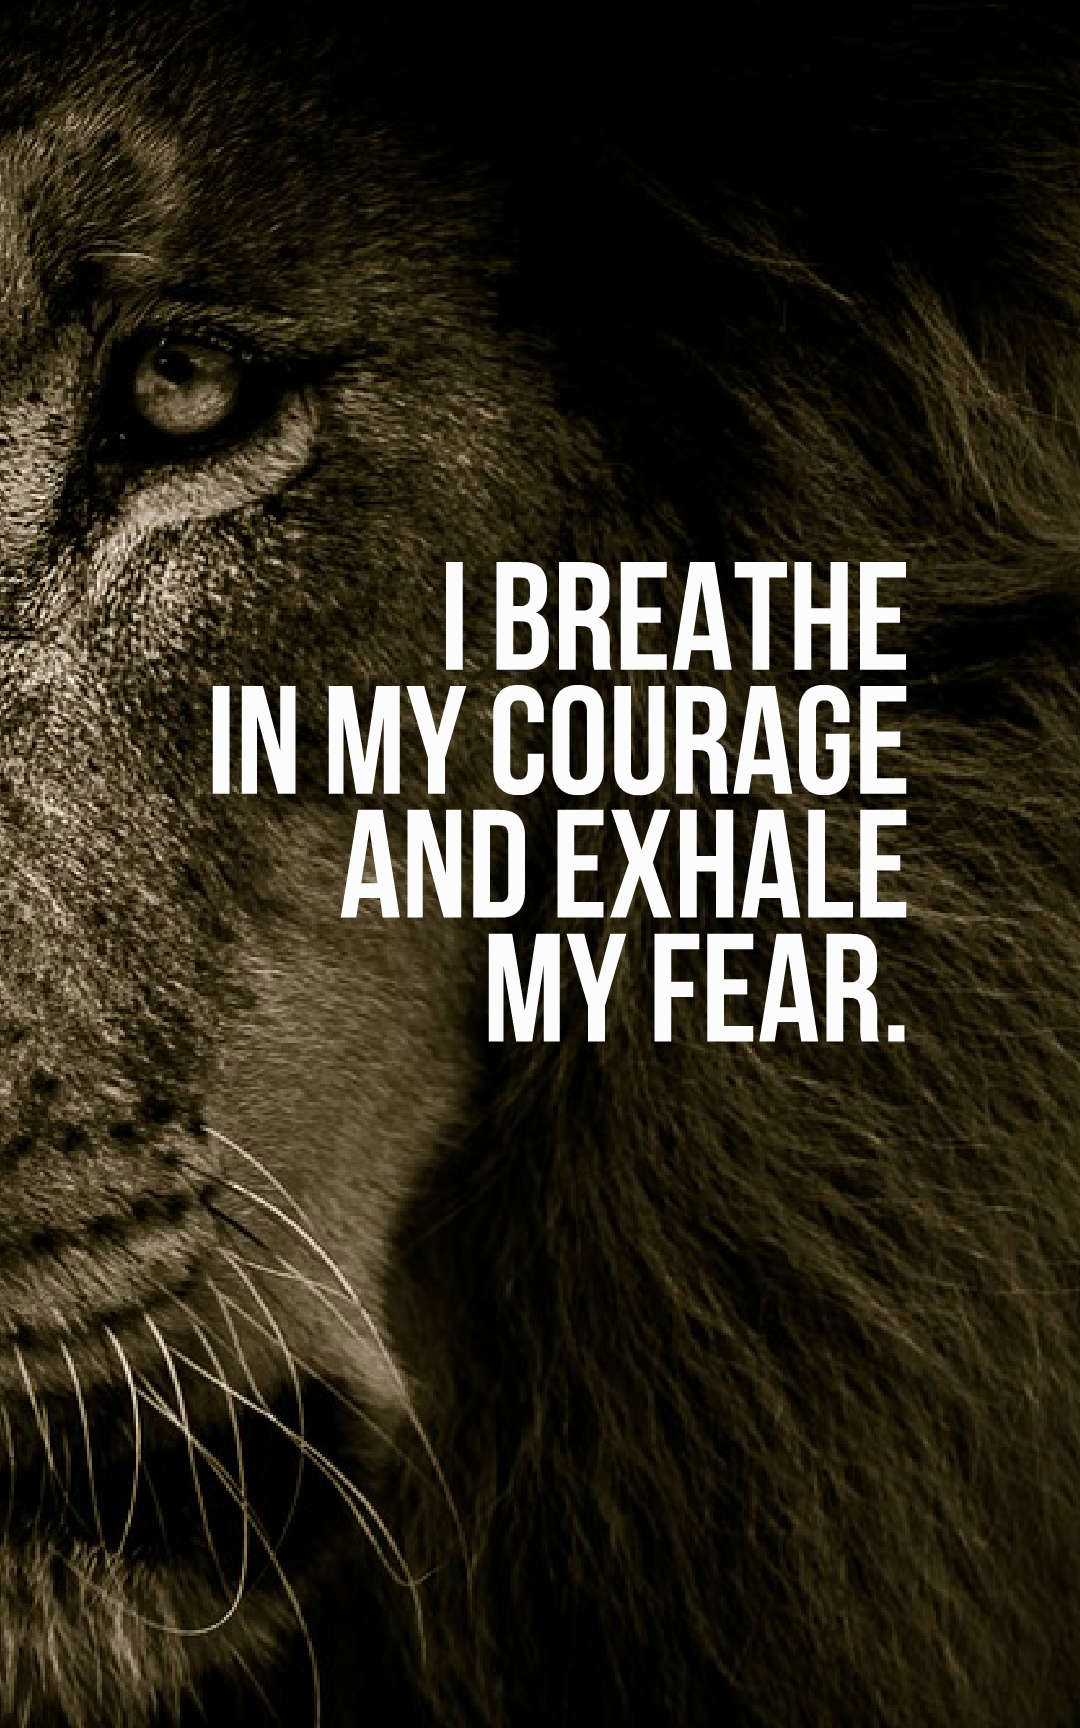 I breathe in my courage and exhale my fear.